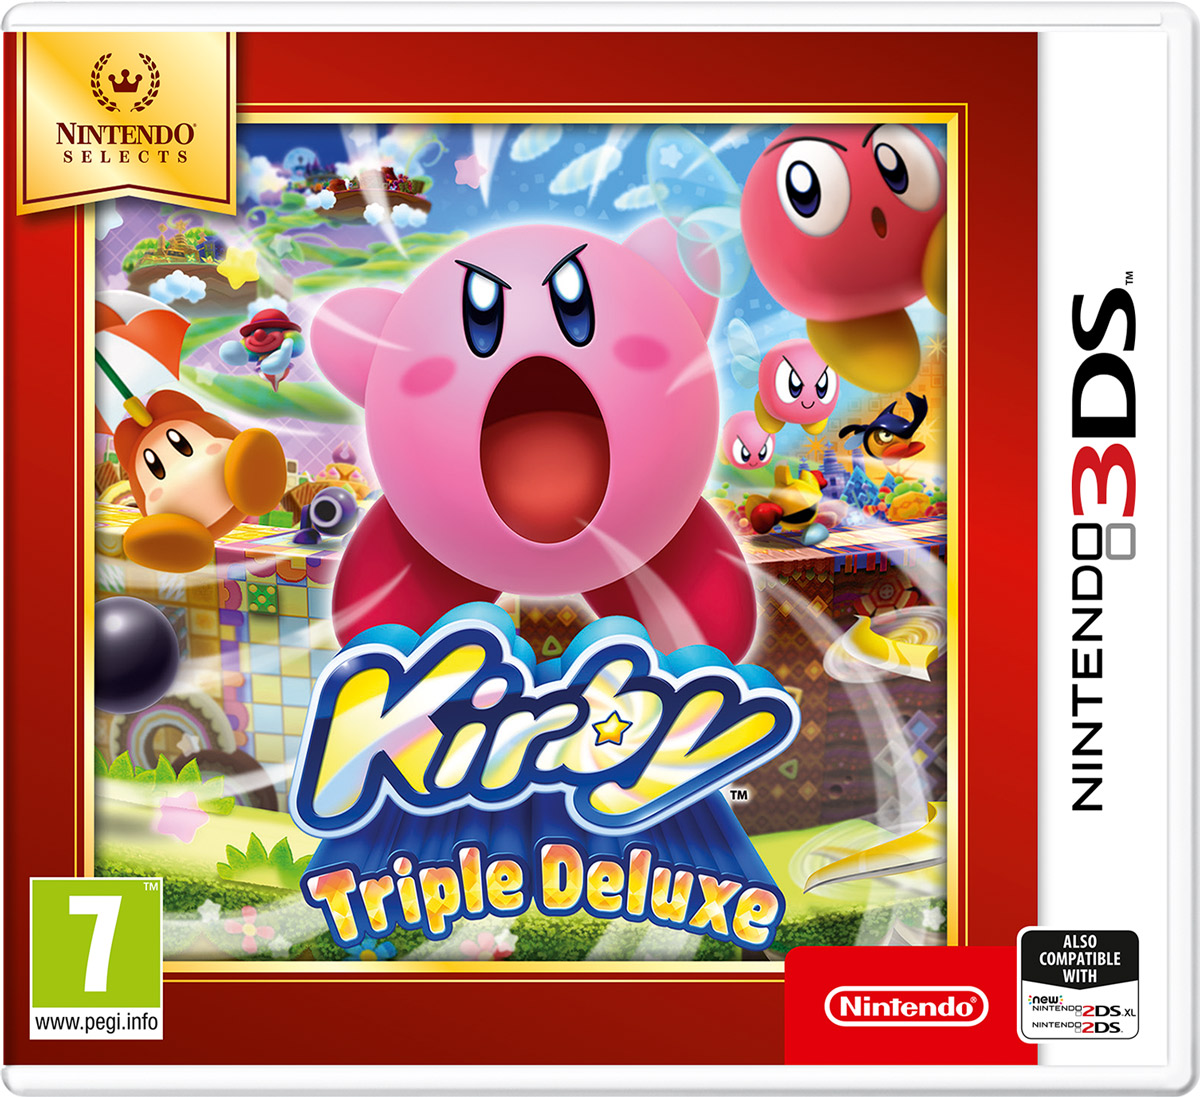 Nintendo Selects Kirby Triple Deluxe (3DS)